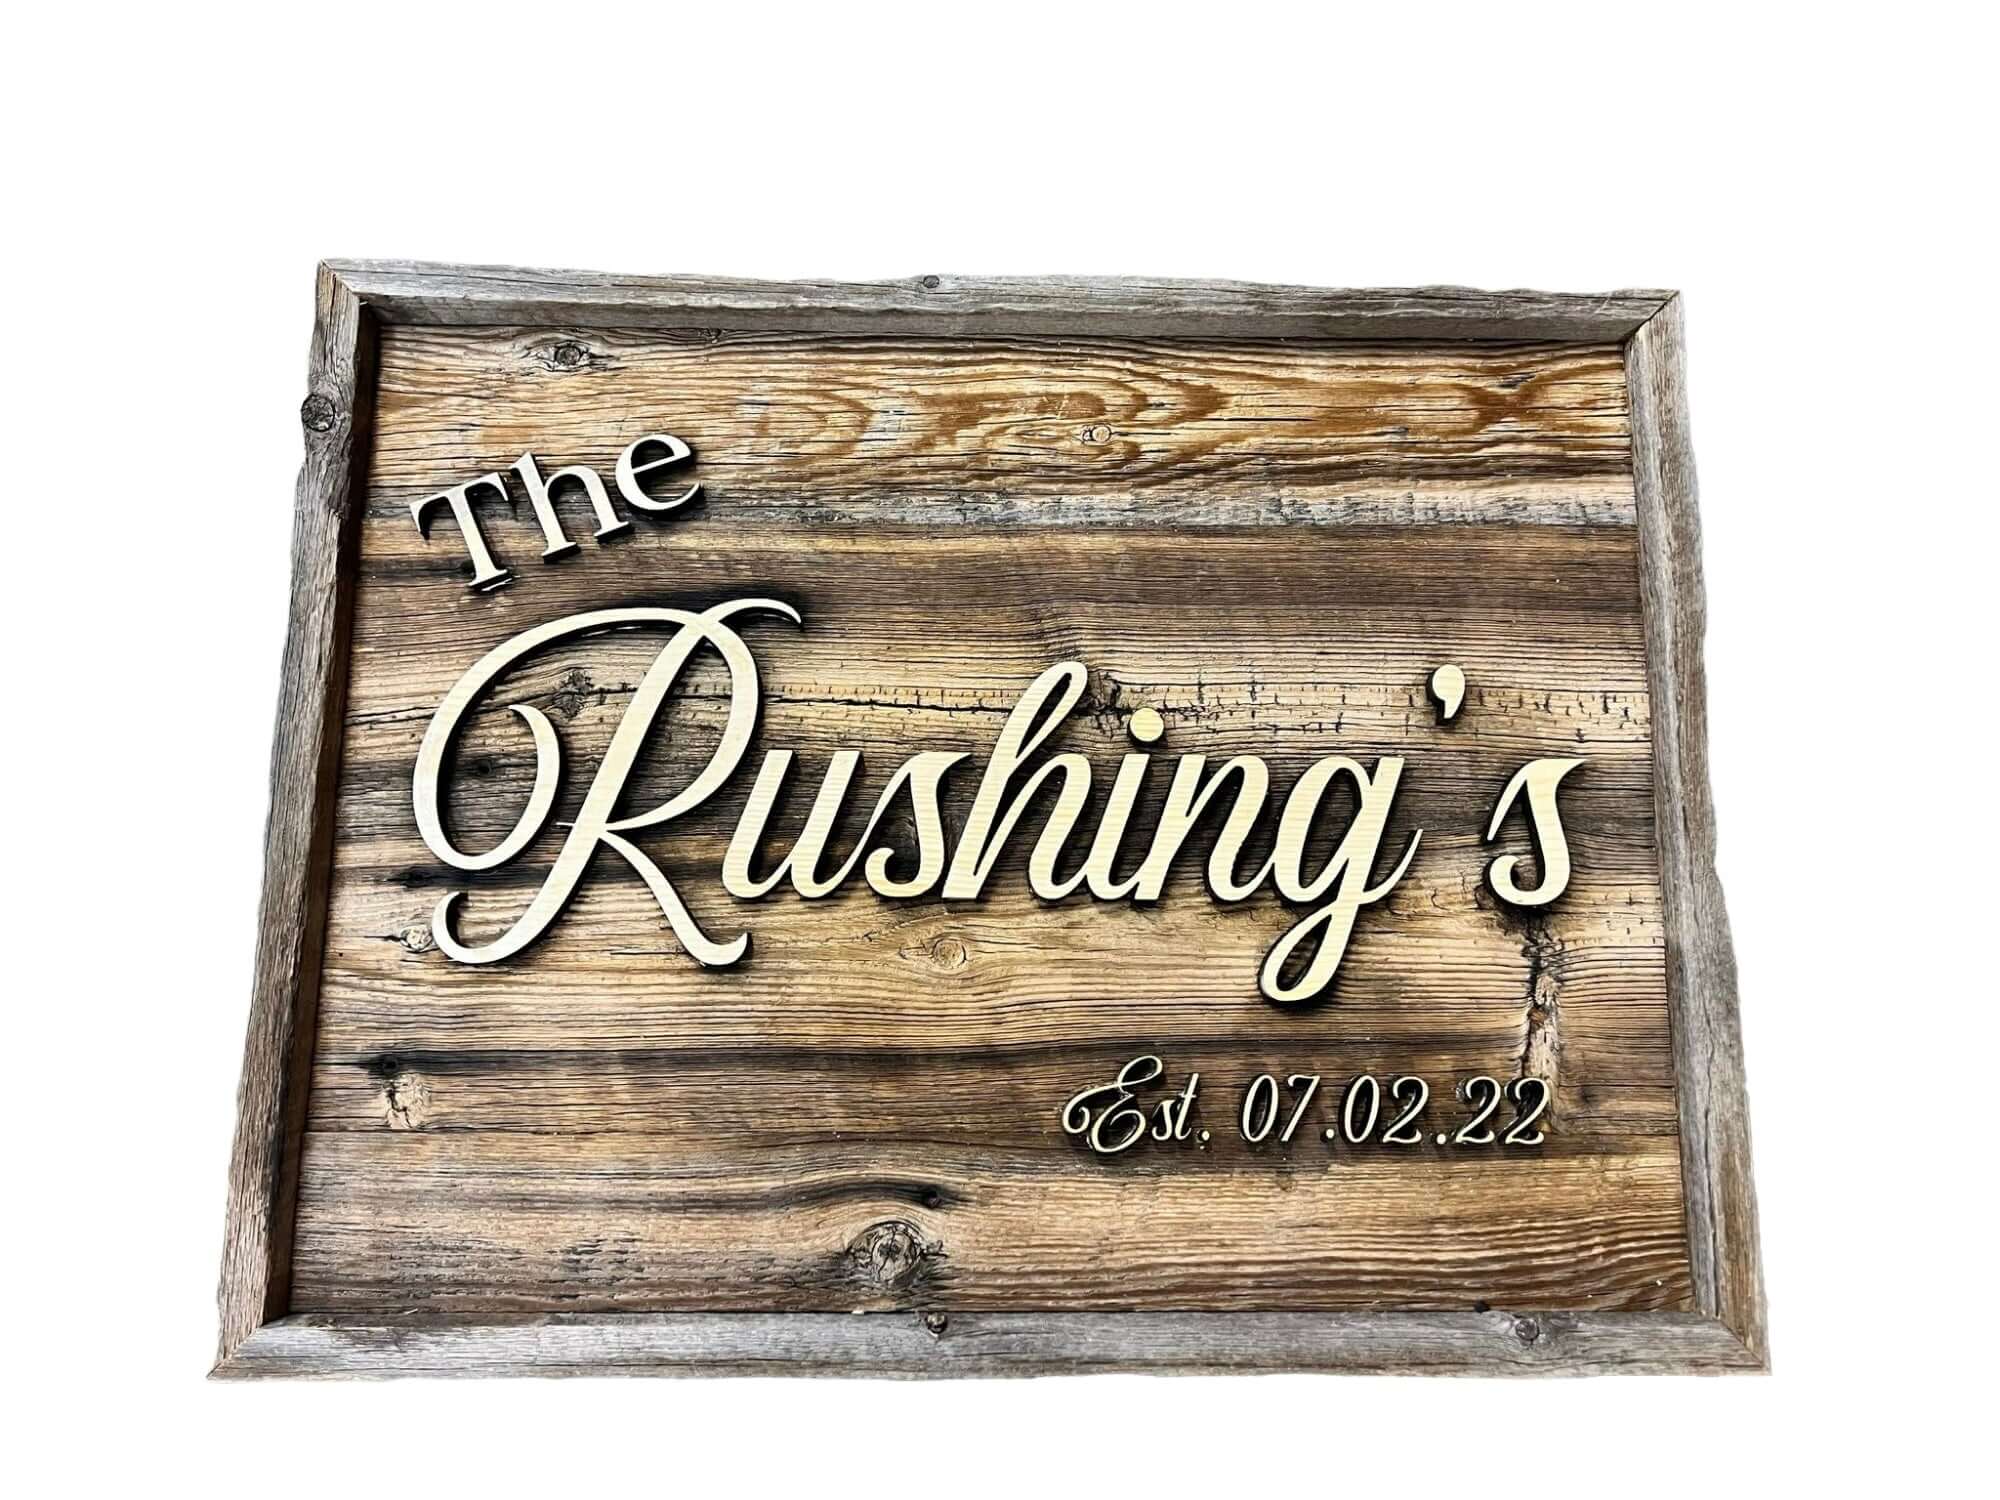 A rustic 19x25 inch wedding sign, made of rustic barn wood with offset inlaid lettering of last name. Custom made to order.